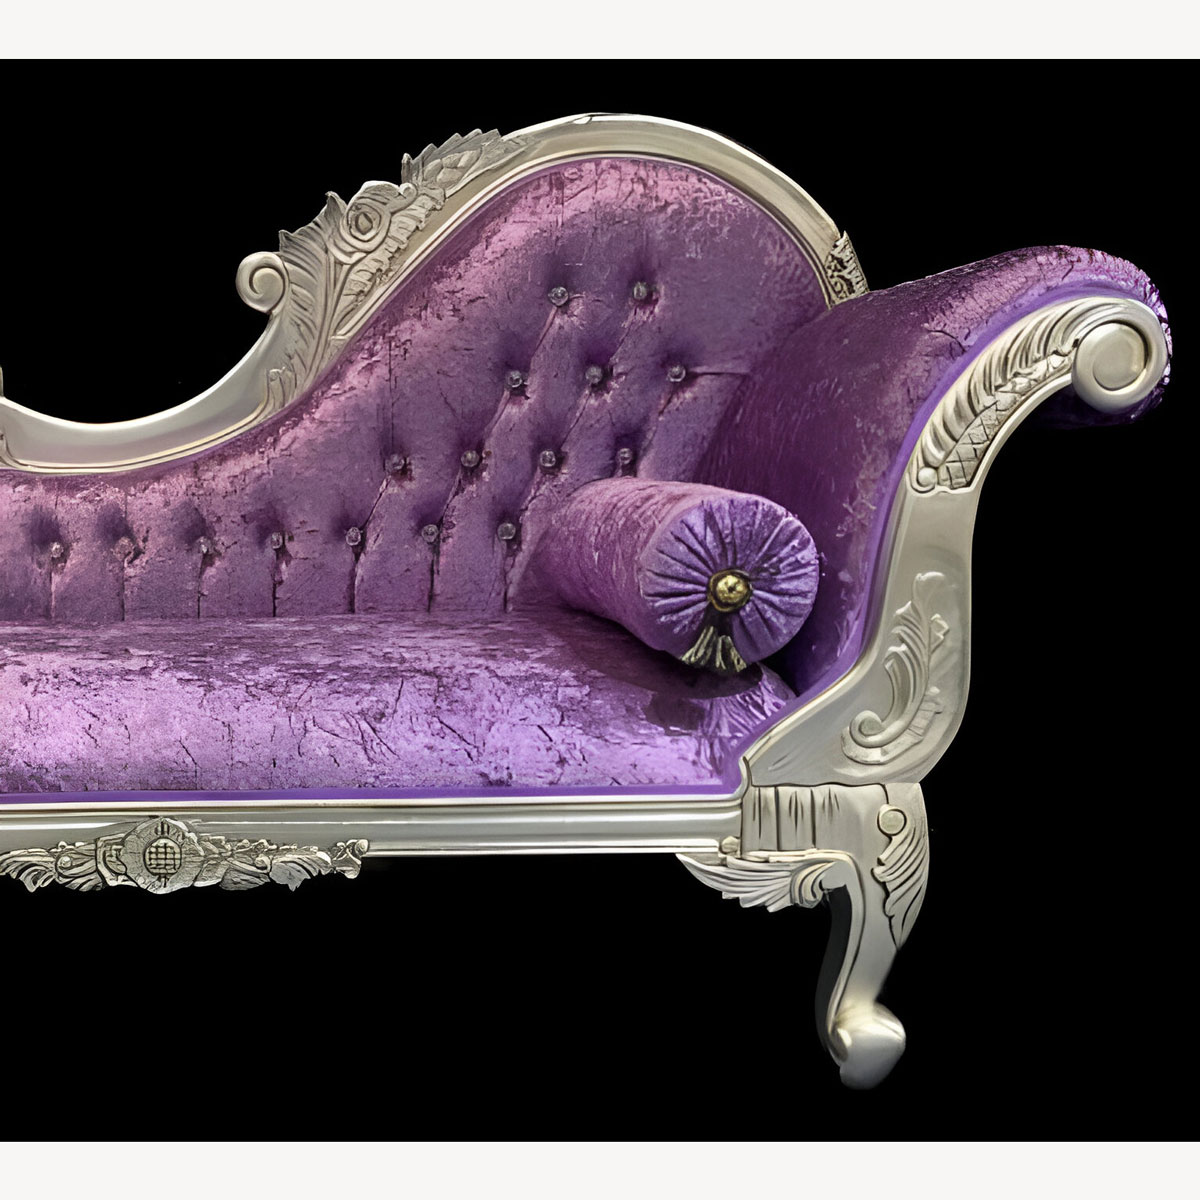 Silver Leaf Medium Hampshire Chaise In Lavender Crushed Velvet With Crystal Buttoning 4 - Hampshire Barn Interiors - Silver Leaf Medium Hampshire Chaise In Lavender Crushed Velvet With Crystal Buttoning -